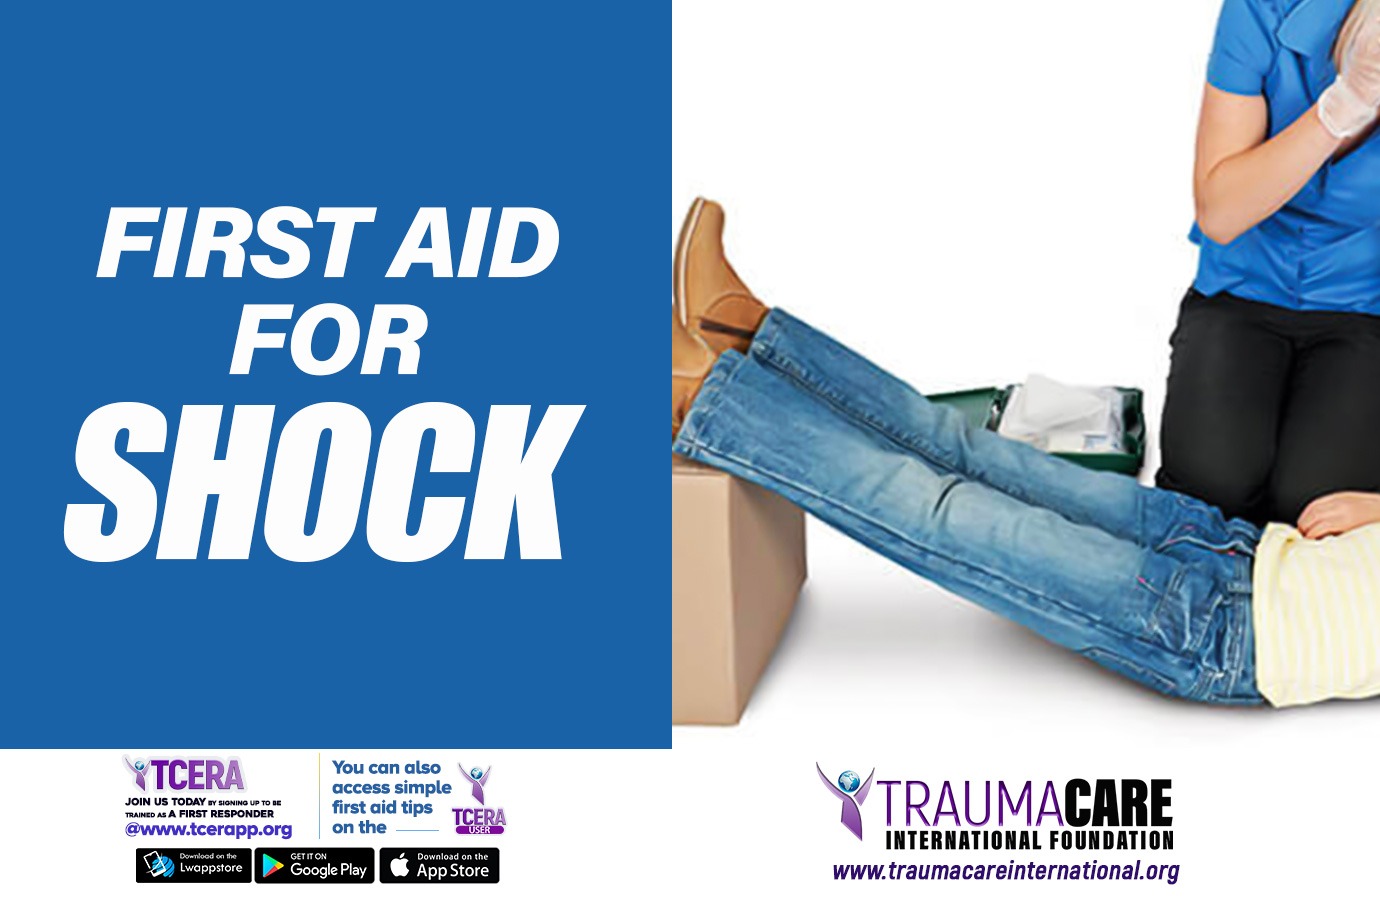 FIRST AID FOR SHOCK